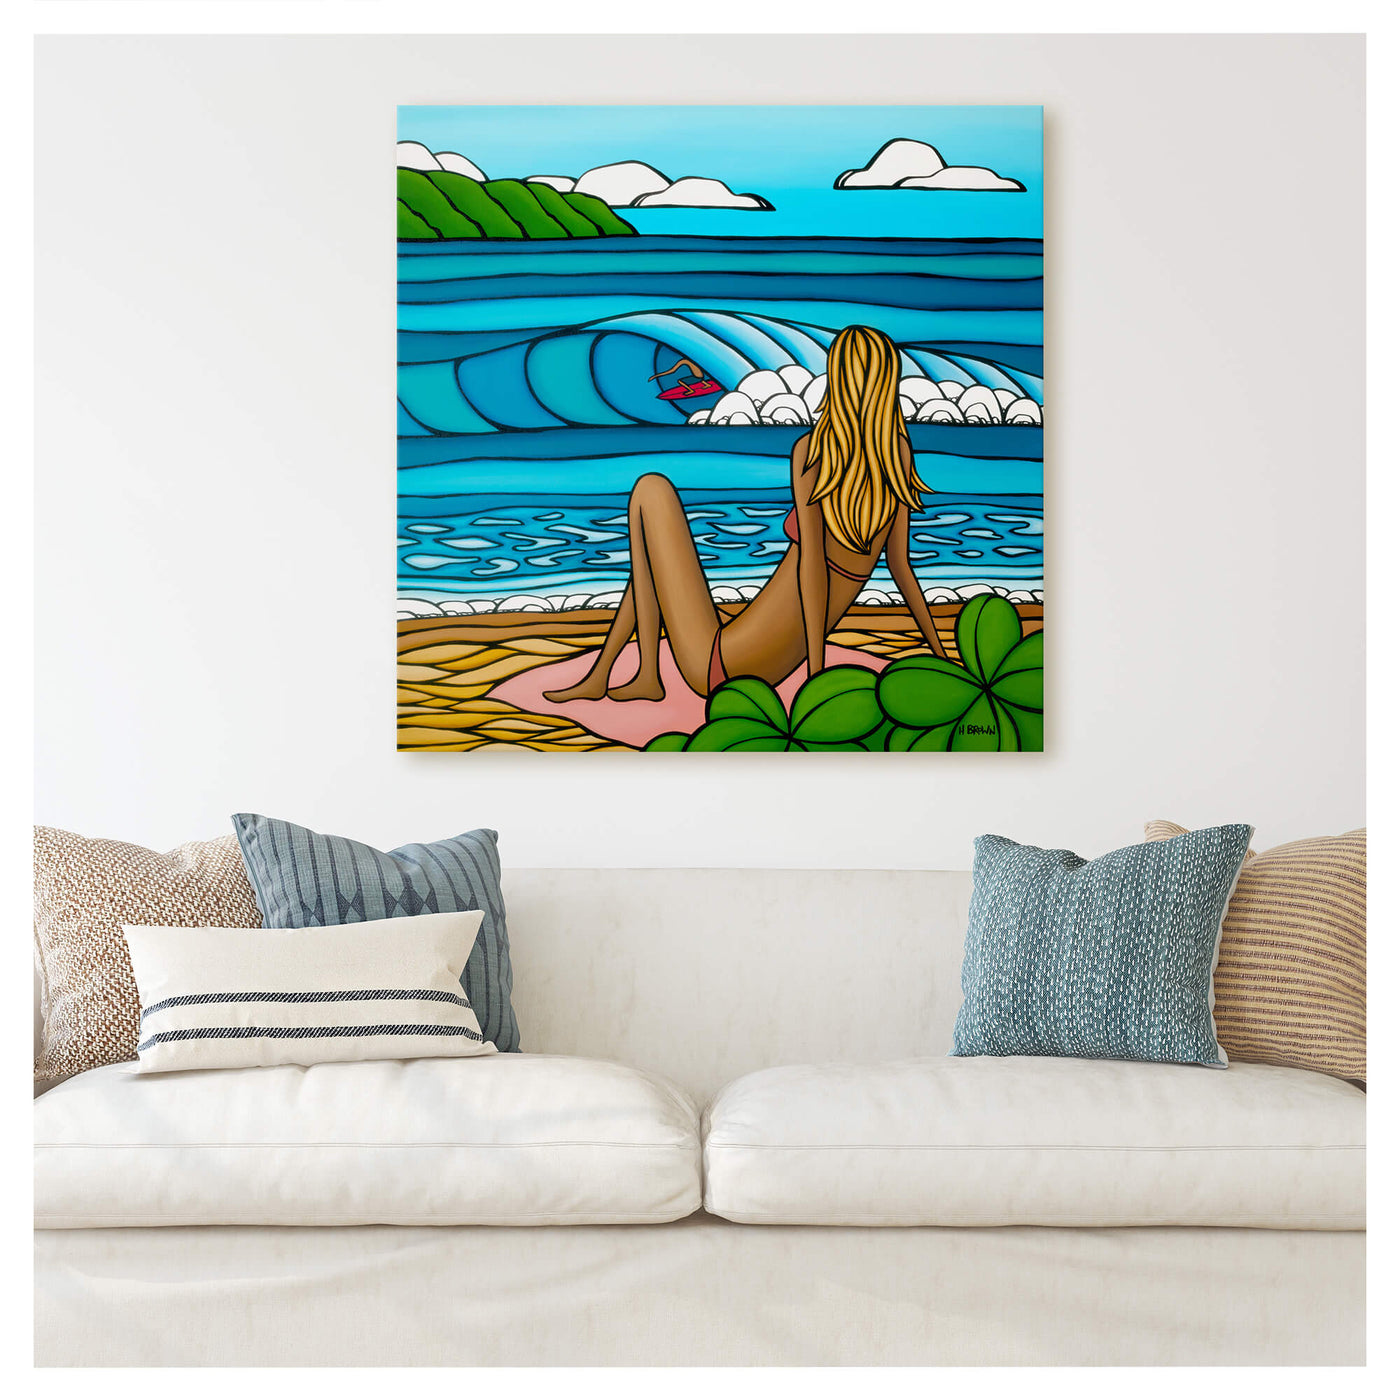 A woman watching a surfer riding the epic waves of Hawaii by Kauai surf artist Heather Brown